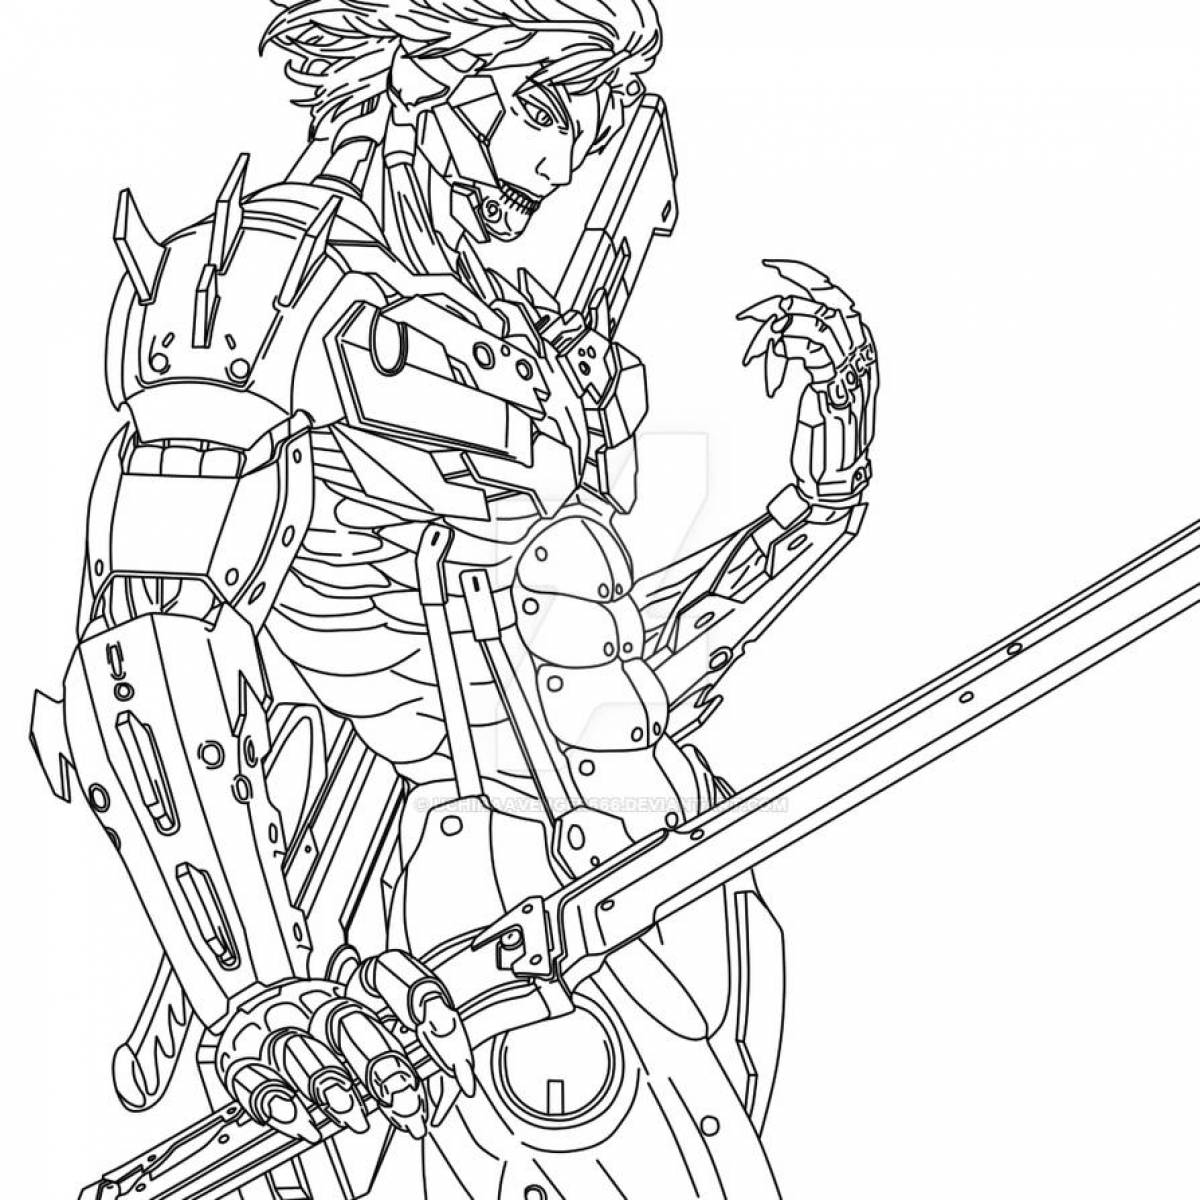 Raiden animated coloring page